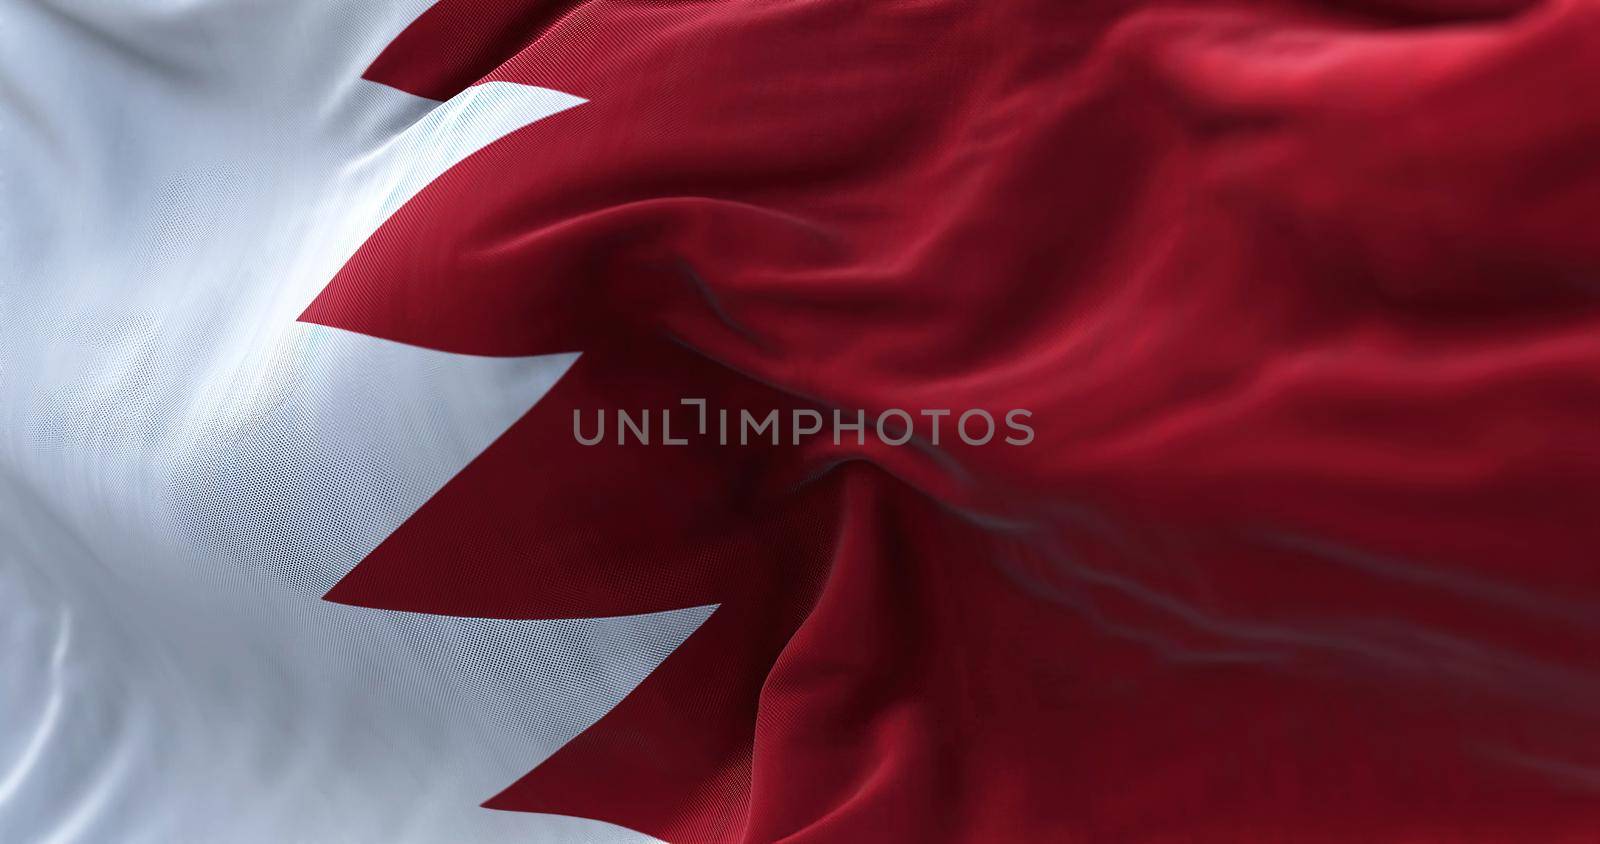 Close-up view of the Bahrain national flag waving in the wind. The Kingdom of Bahrain,[a] is an island country in Western Asia. Fabric textured background. Selective focus